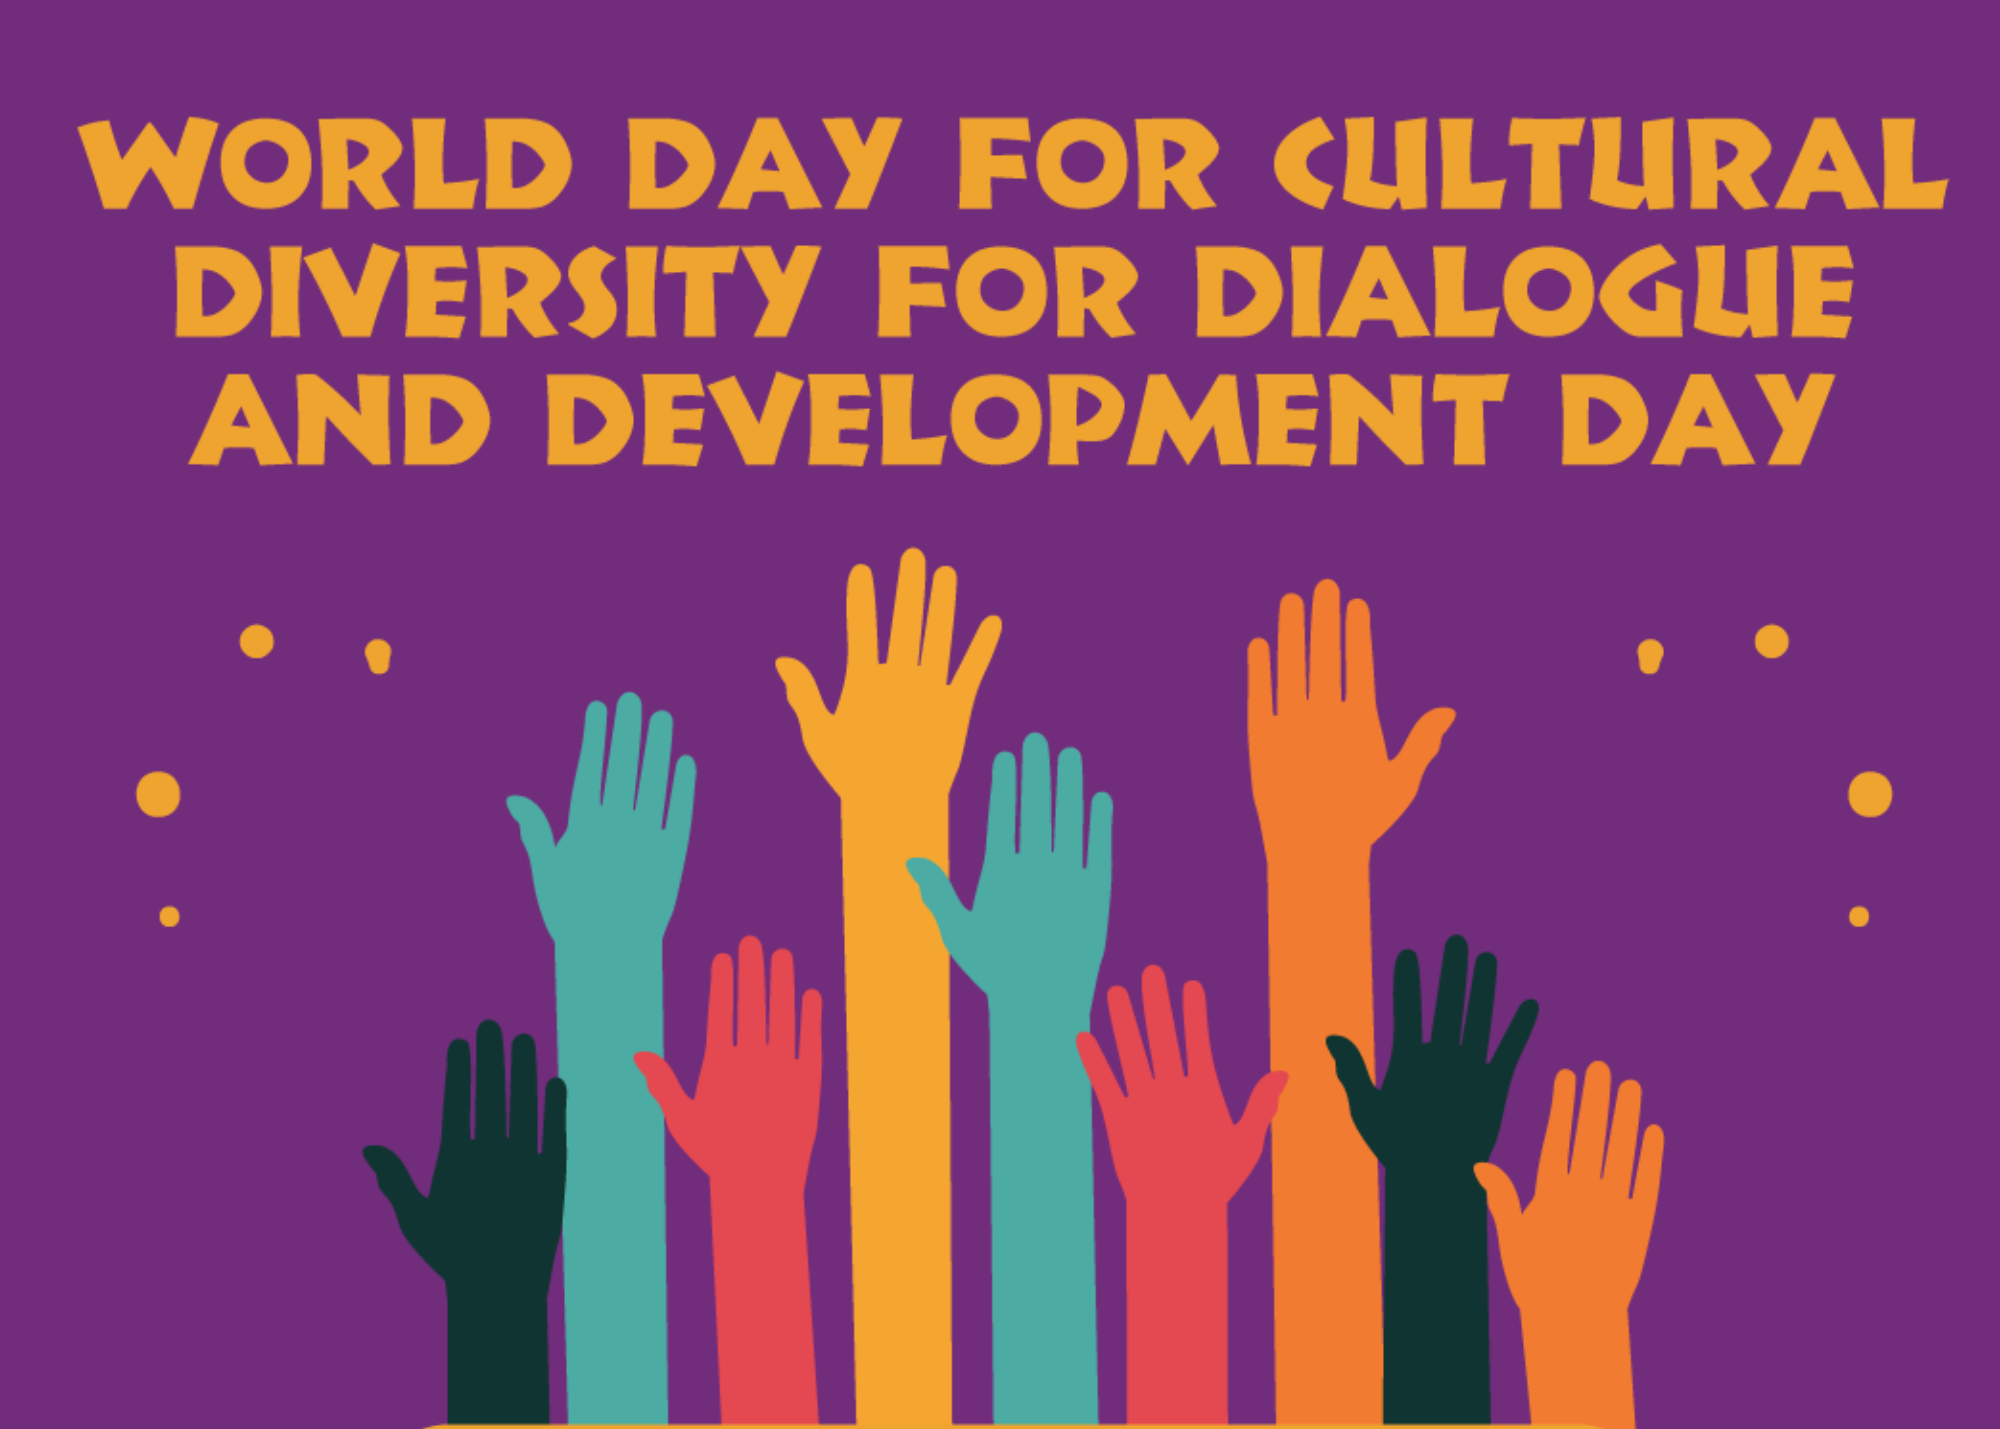 This day aims to promote cultural diversity, understanding, and dialogue among people worldwide.